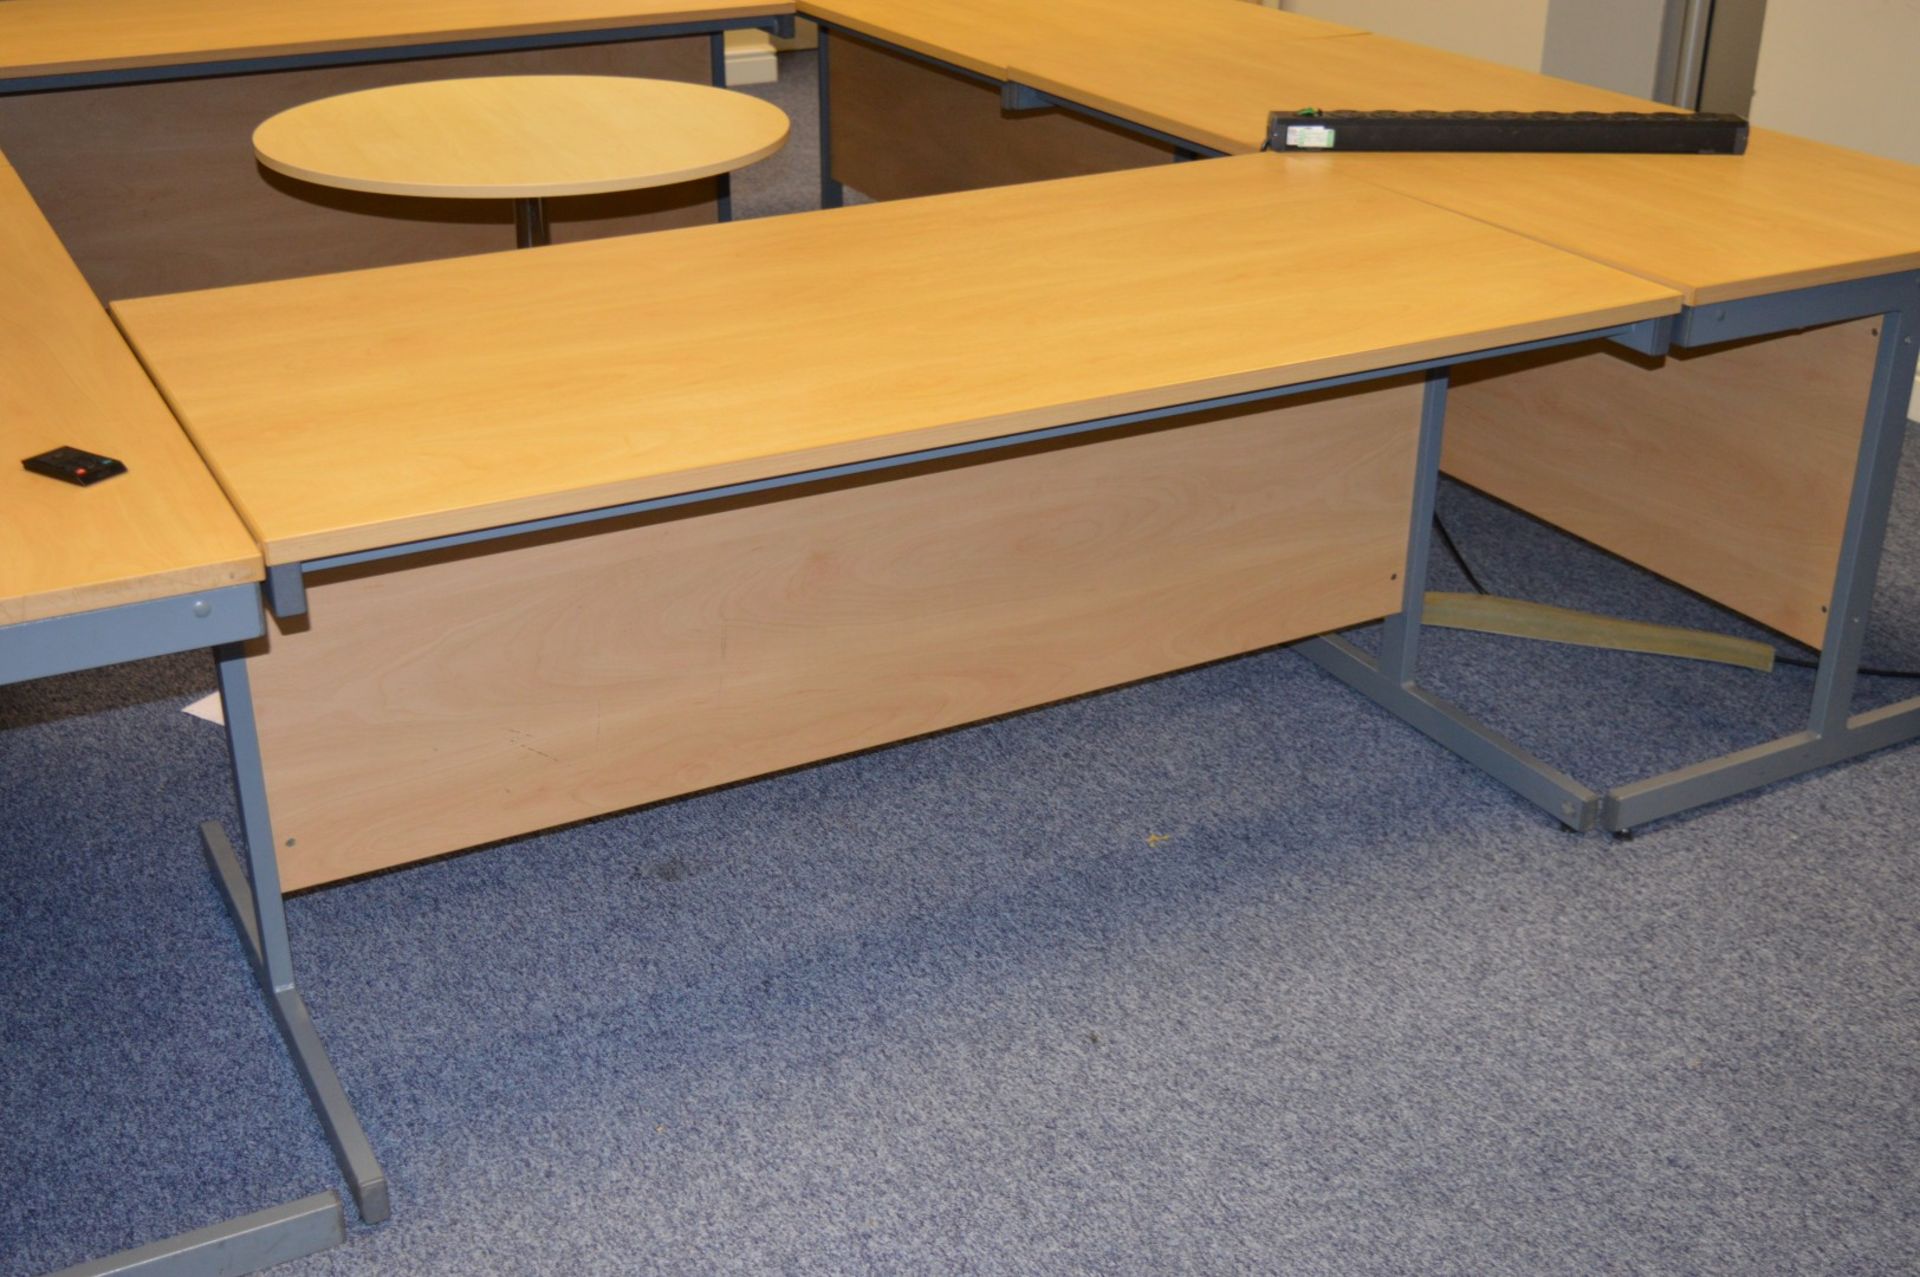 6 x Large Office Desks Plus Small Circular Meeting Table - H73 x W160 x D80 cms - Premium Quality - Image 3 of 5